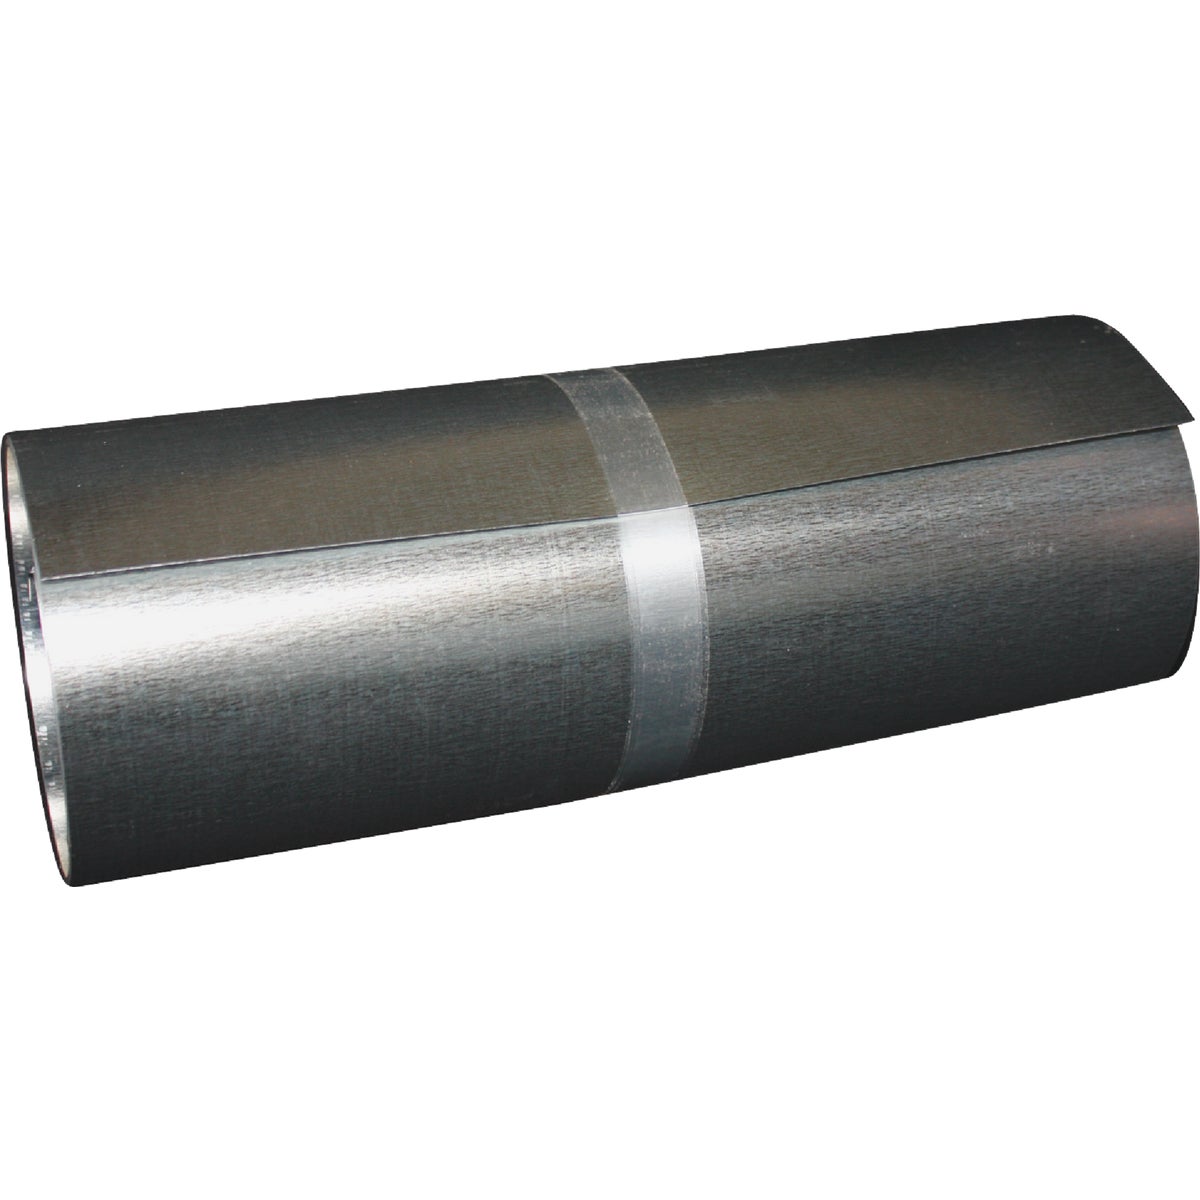 Item 104283, Also referred to as valley metal or valley flashing, is used in a wide 